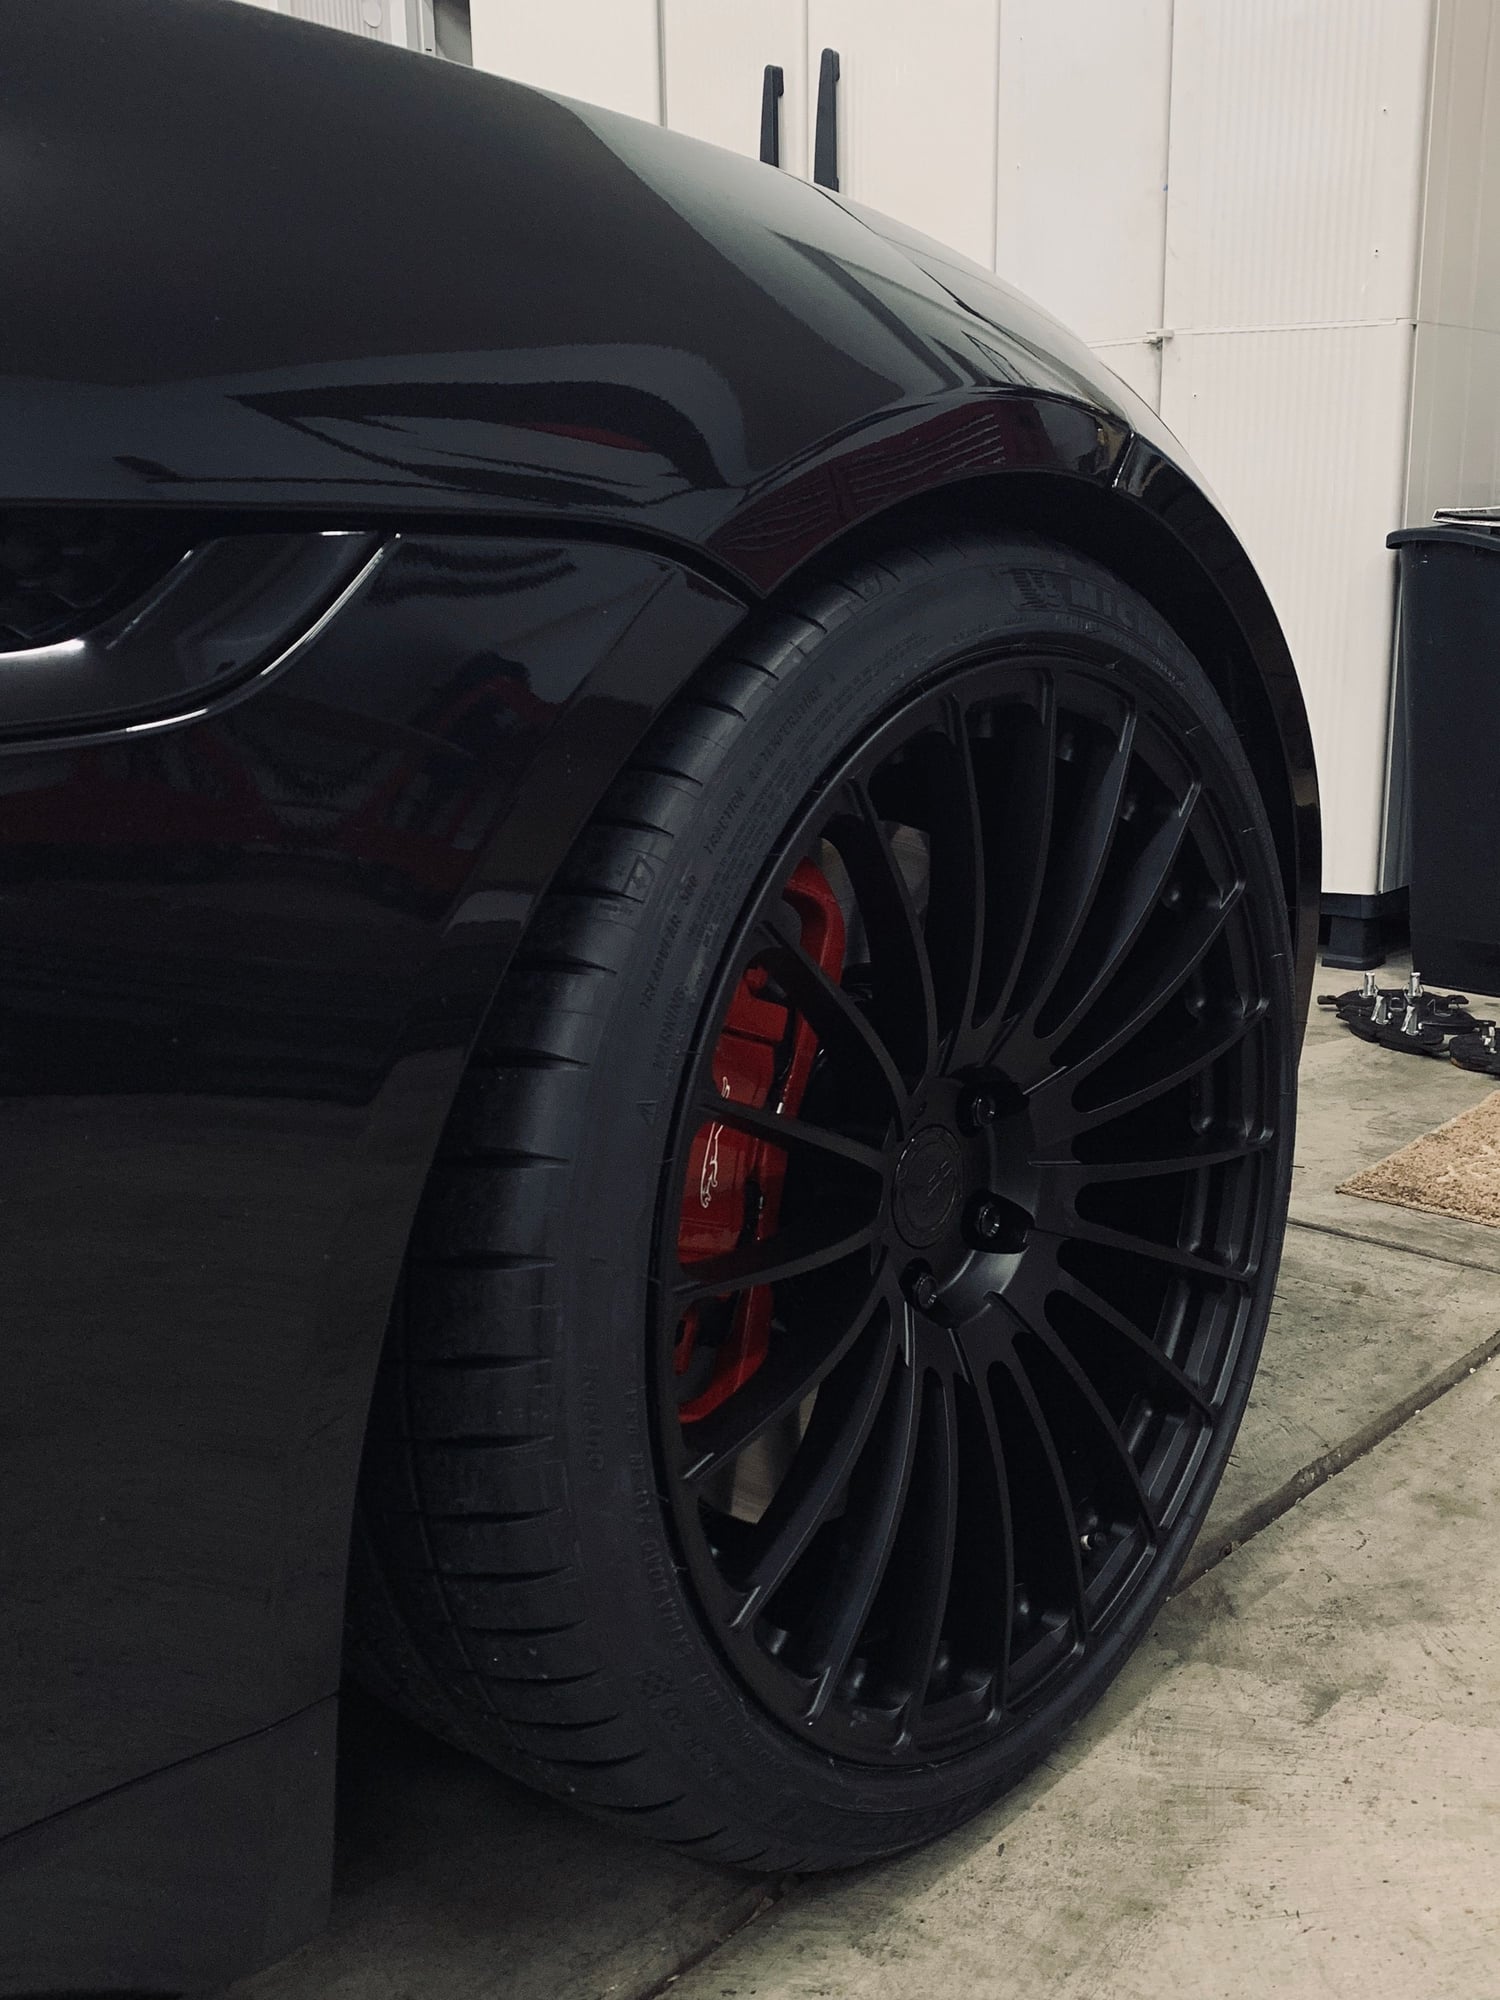 Wheels and Tires/Axles - [TRADE] BC Forged wheels + tires for your OE wheels + tires - Used - Pleasanton, CA 94566, United States